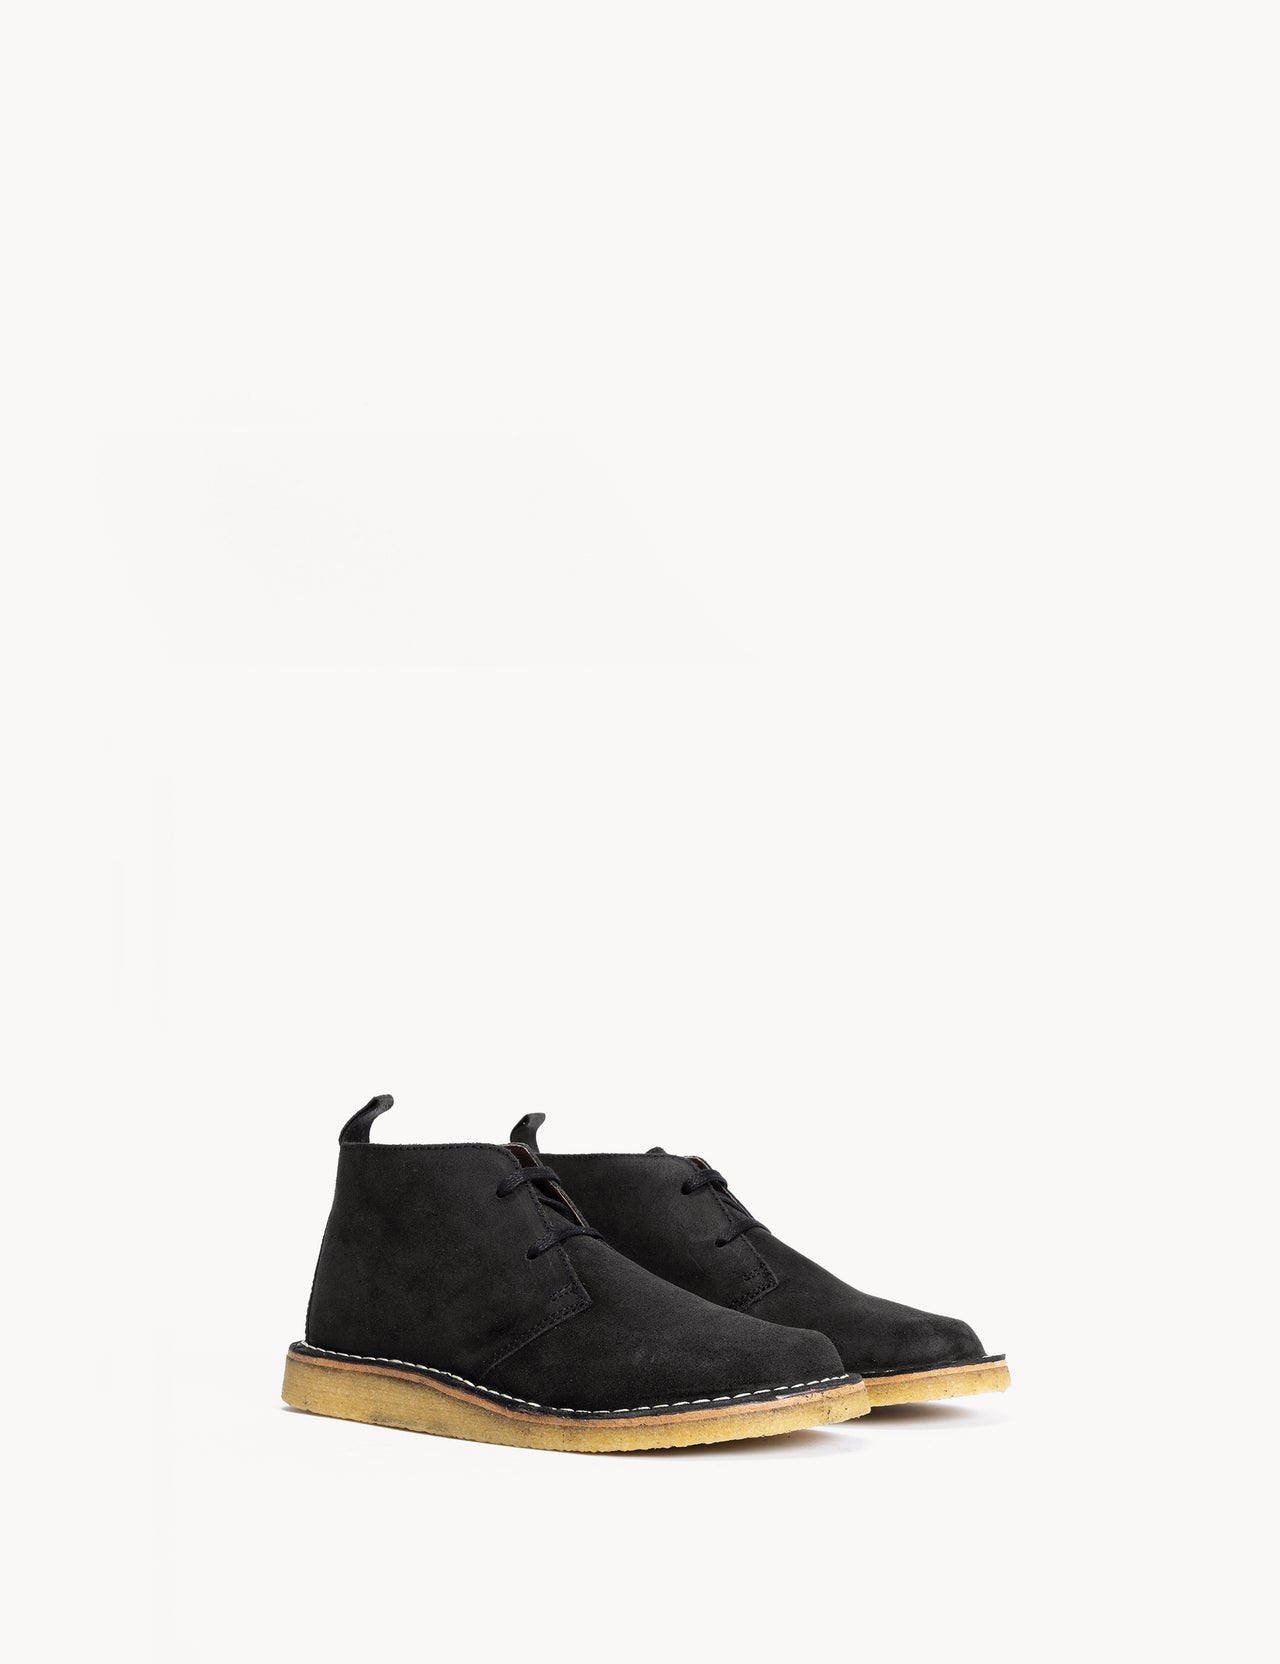 Silja In Black Waxed Suede With a Crepe Sole